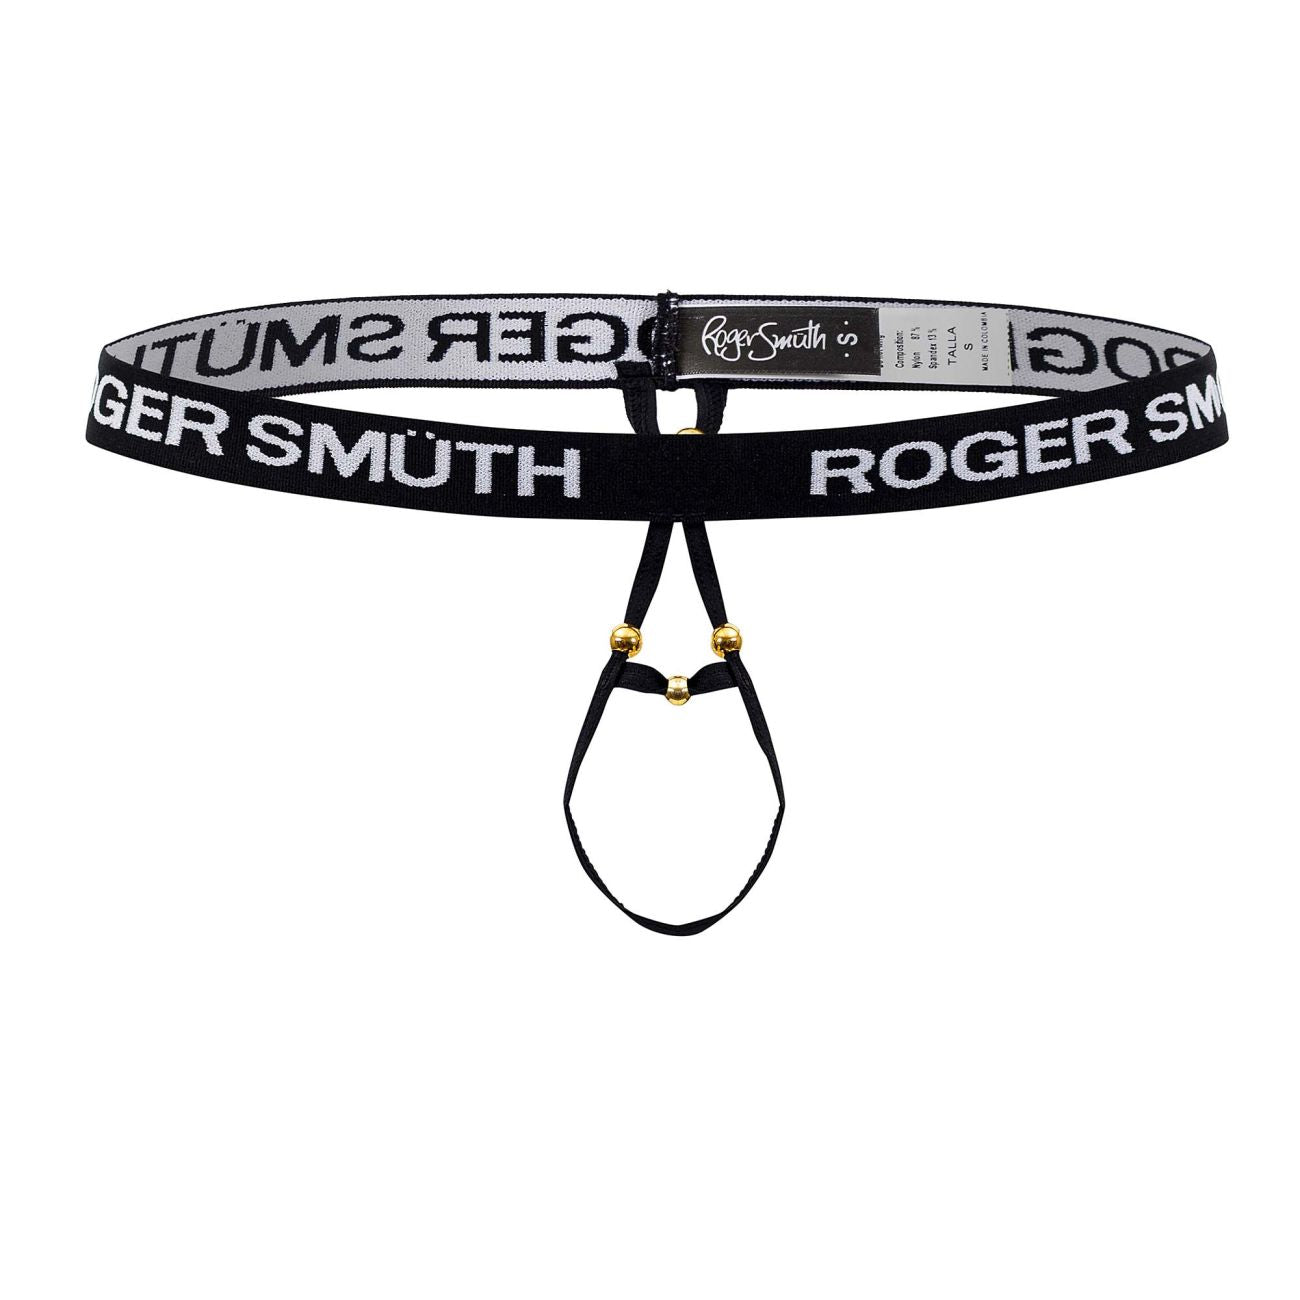 Roger Smuth RS089 Ball Lifter White